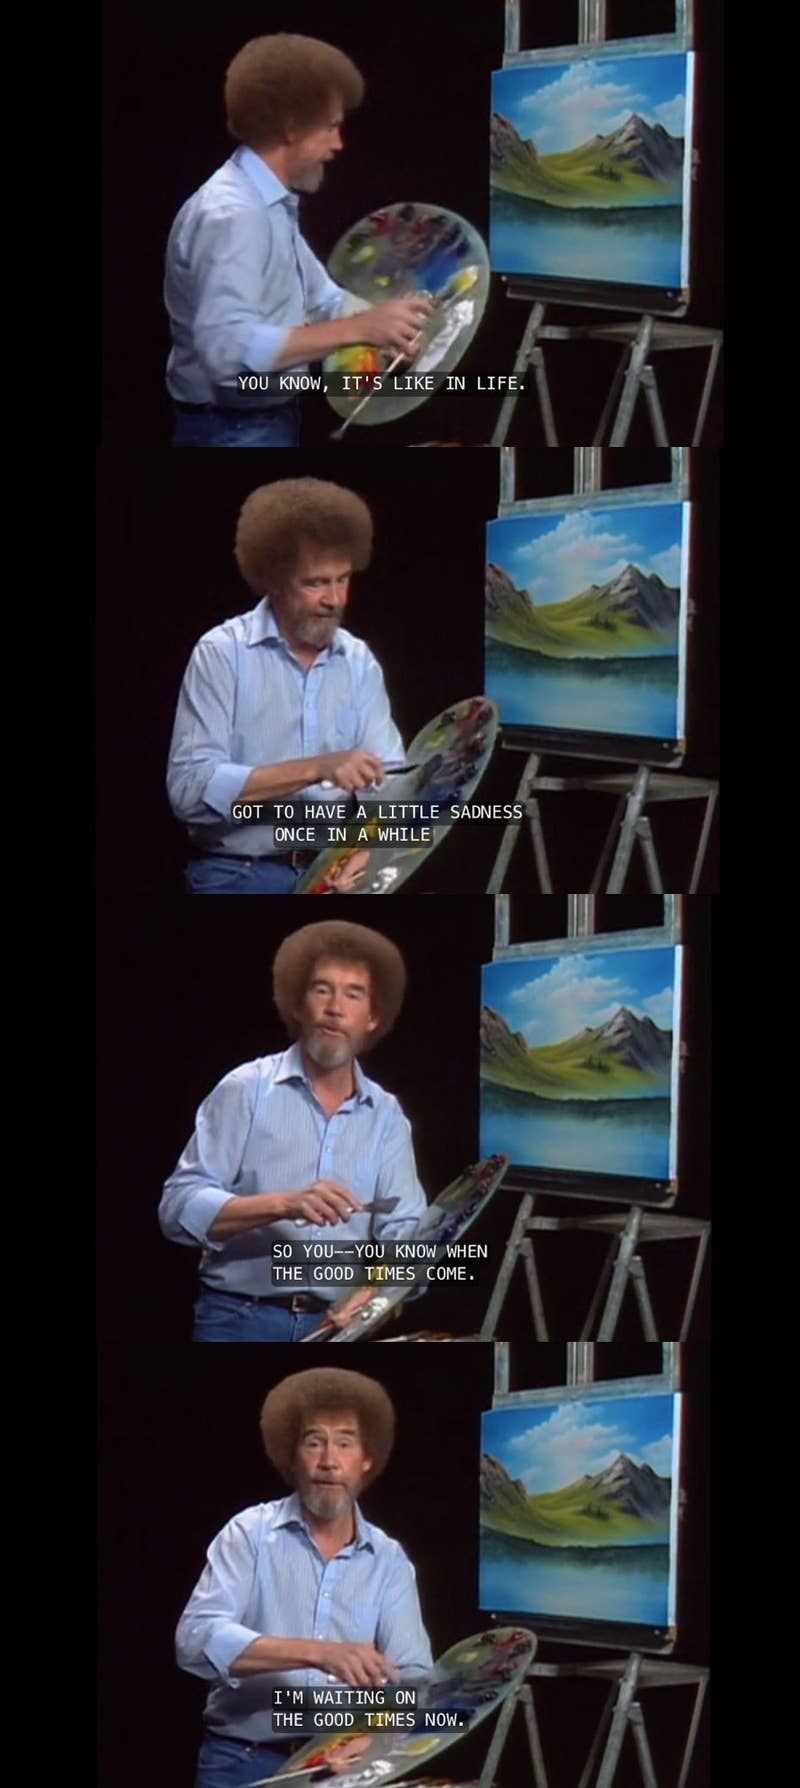 17 Times Bob Ross Healed Our Souls Through The Television